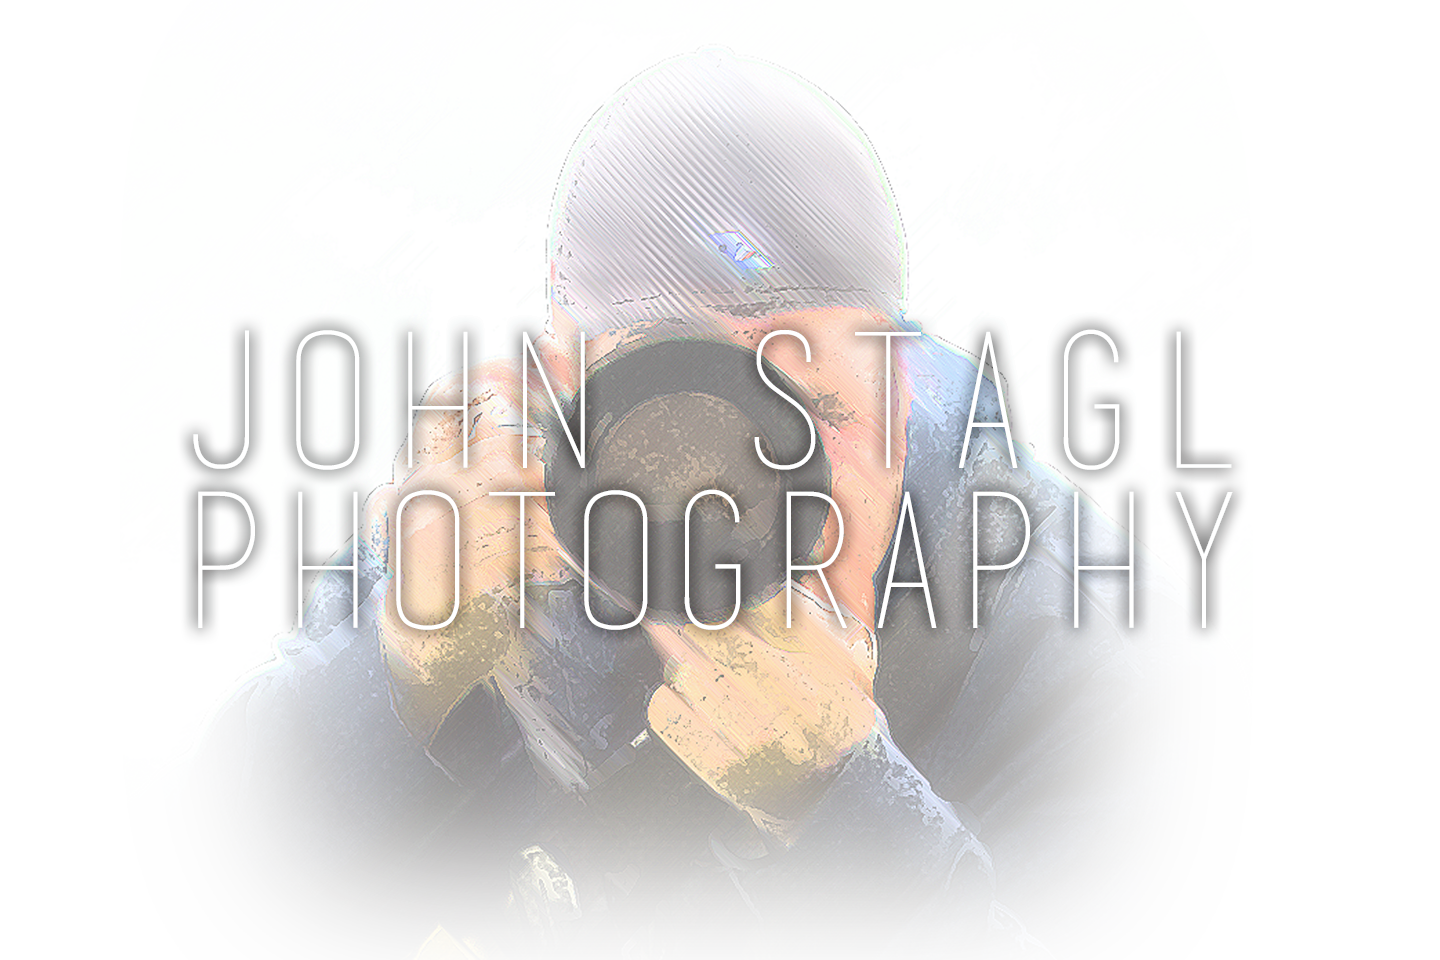 John Stagl Photography, capturing family pictures, memories, and milestones with the click of a shutter.